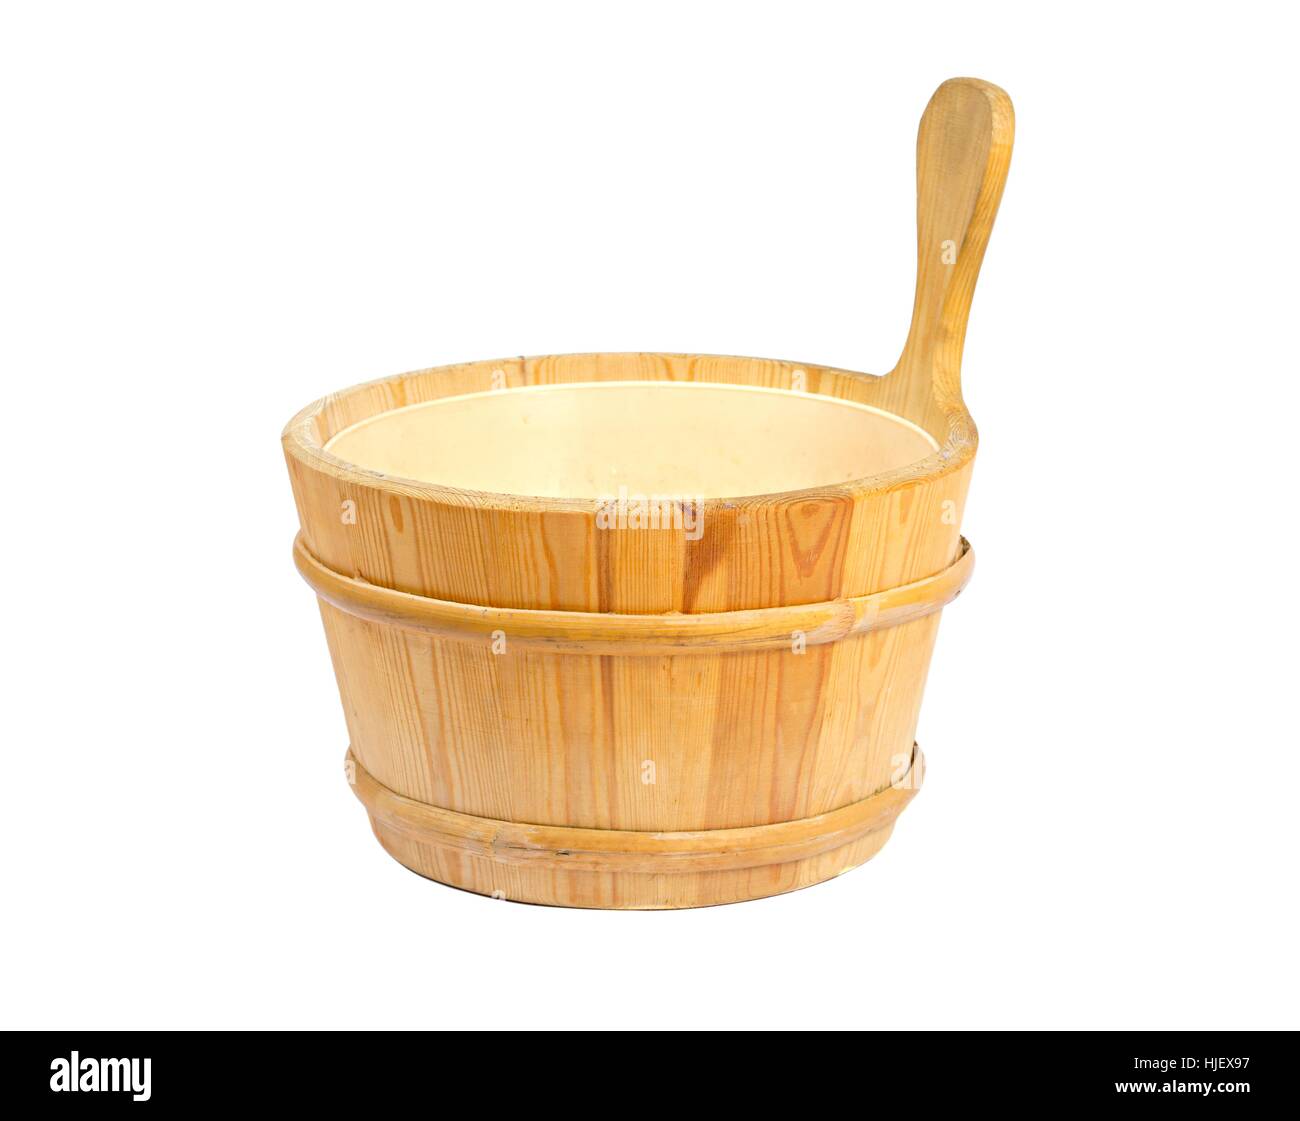 isolated, bucket, wooden, sauna, simple, spa, mineral spring, medicinal spring, Stock Photo